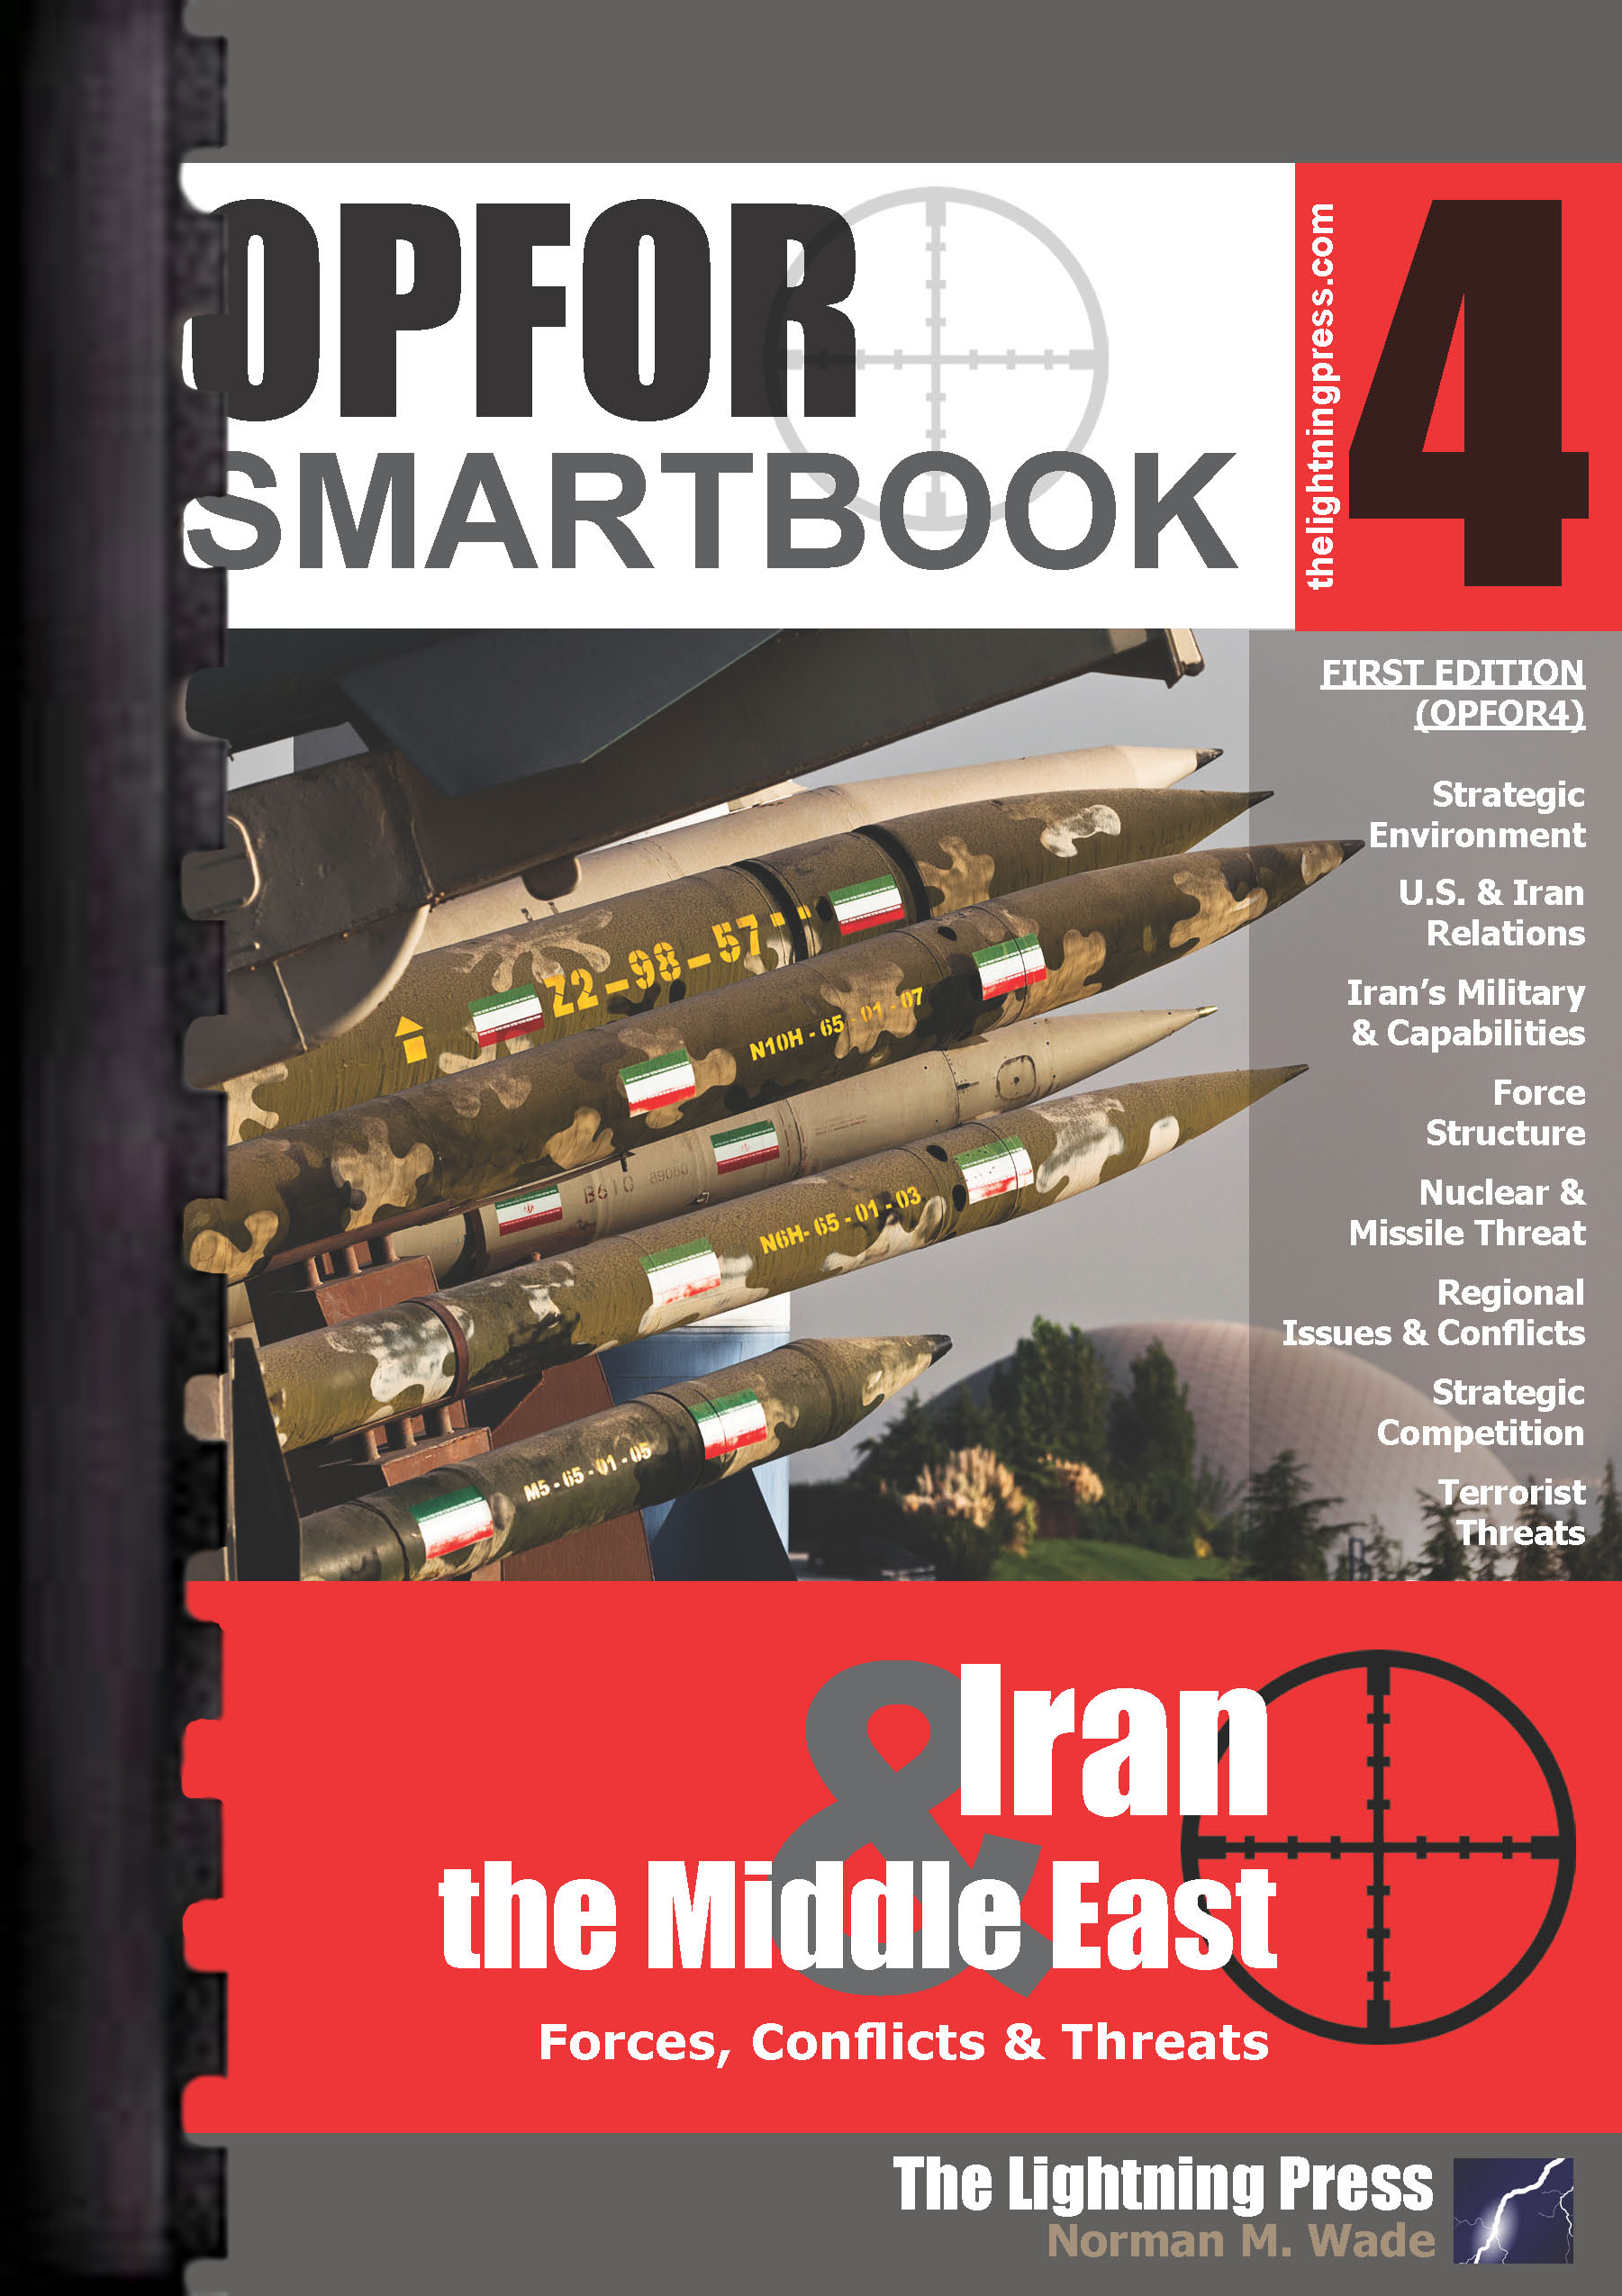 OPFOR SMARTbook 4 - Iran & the Middle East